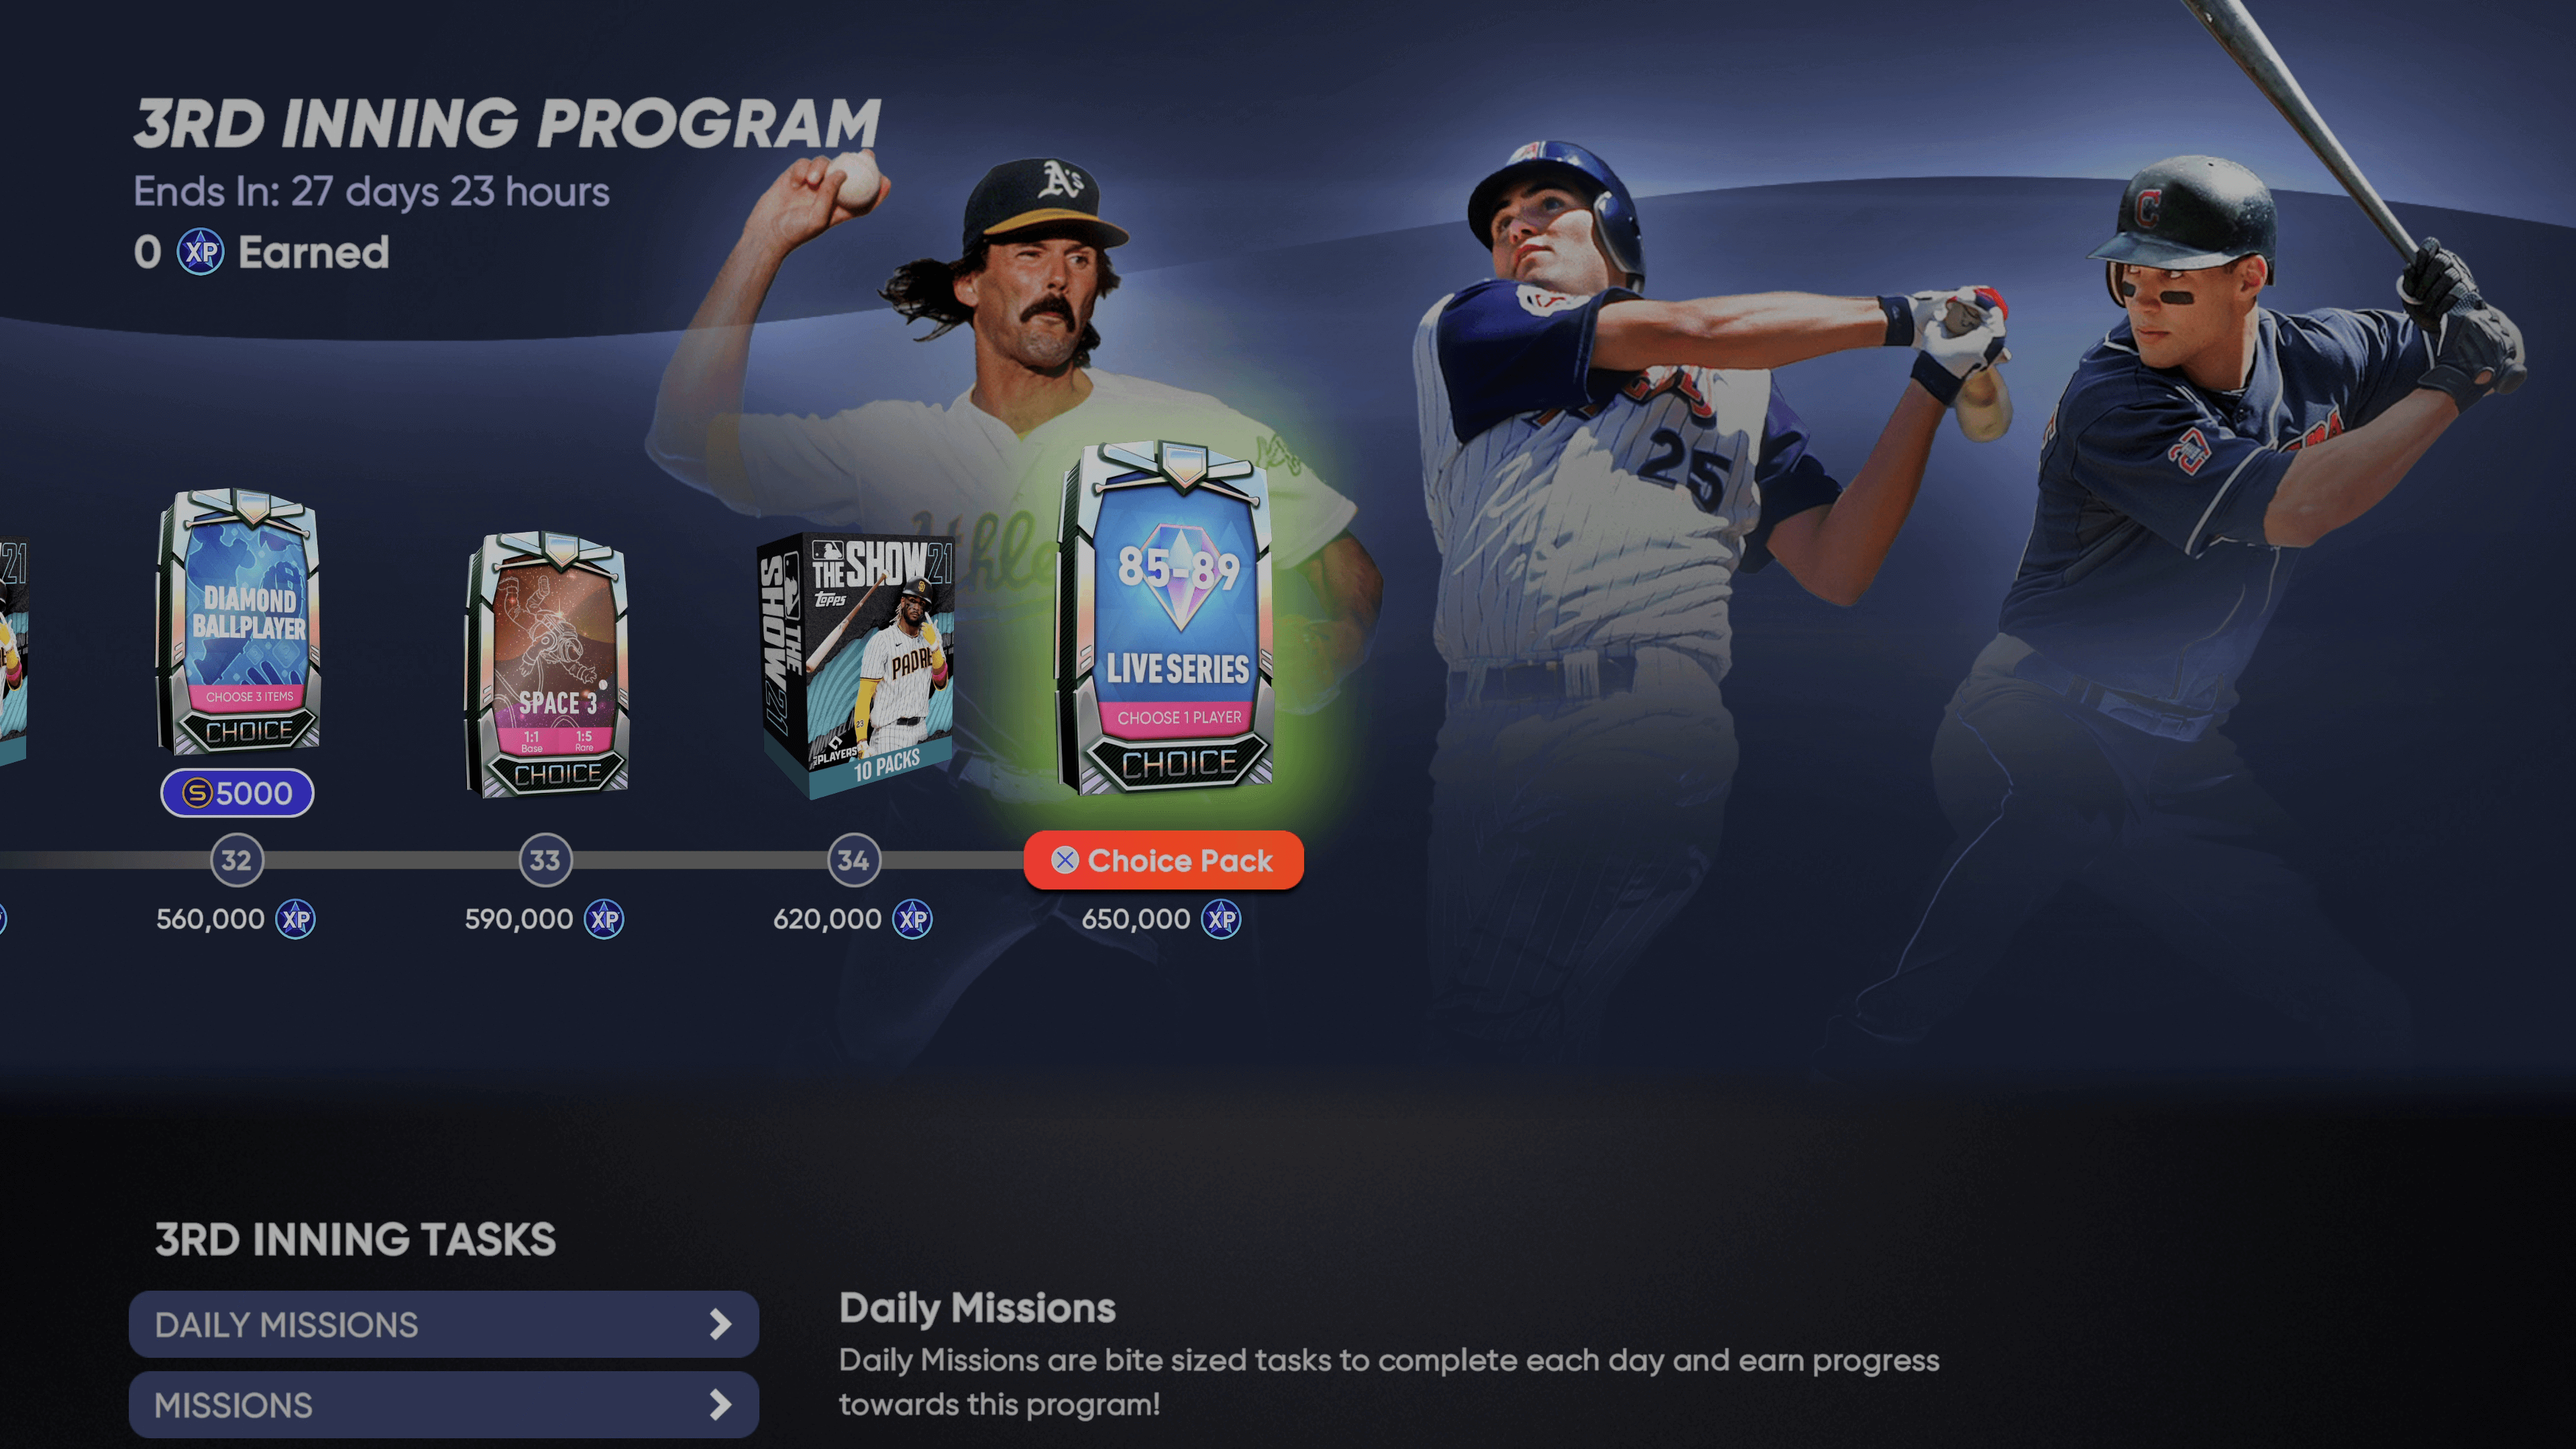 Earn the NEW 3rd Inning Program Bosses in MLB The Show 21!  The 3rd Inning  Program has begun! Earn New Legend 💎Troy Glaus, 💎Grady Sizemore, or  💎Dennis Eckersley! Read through all